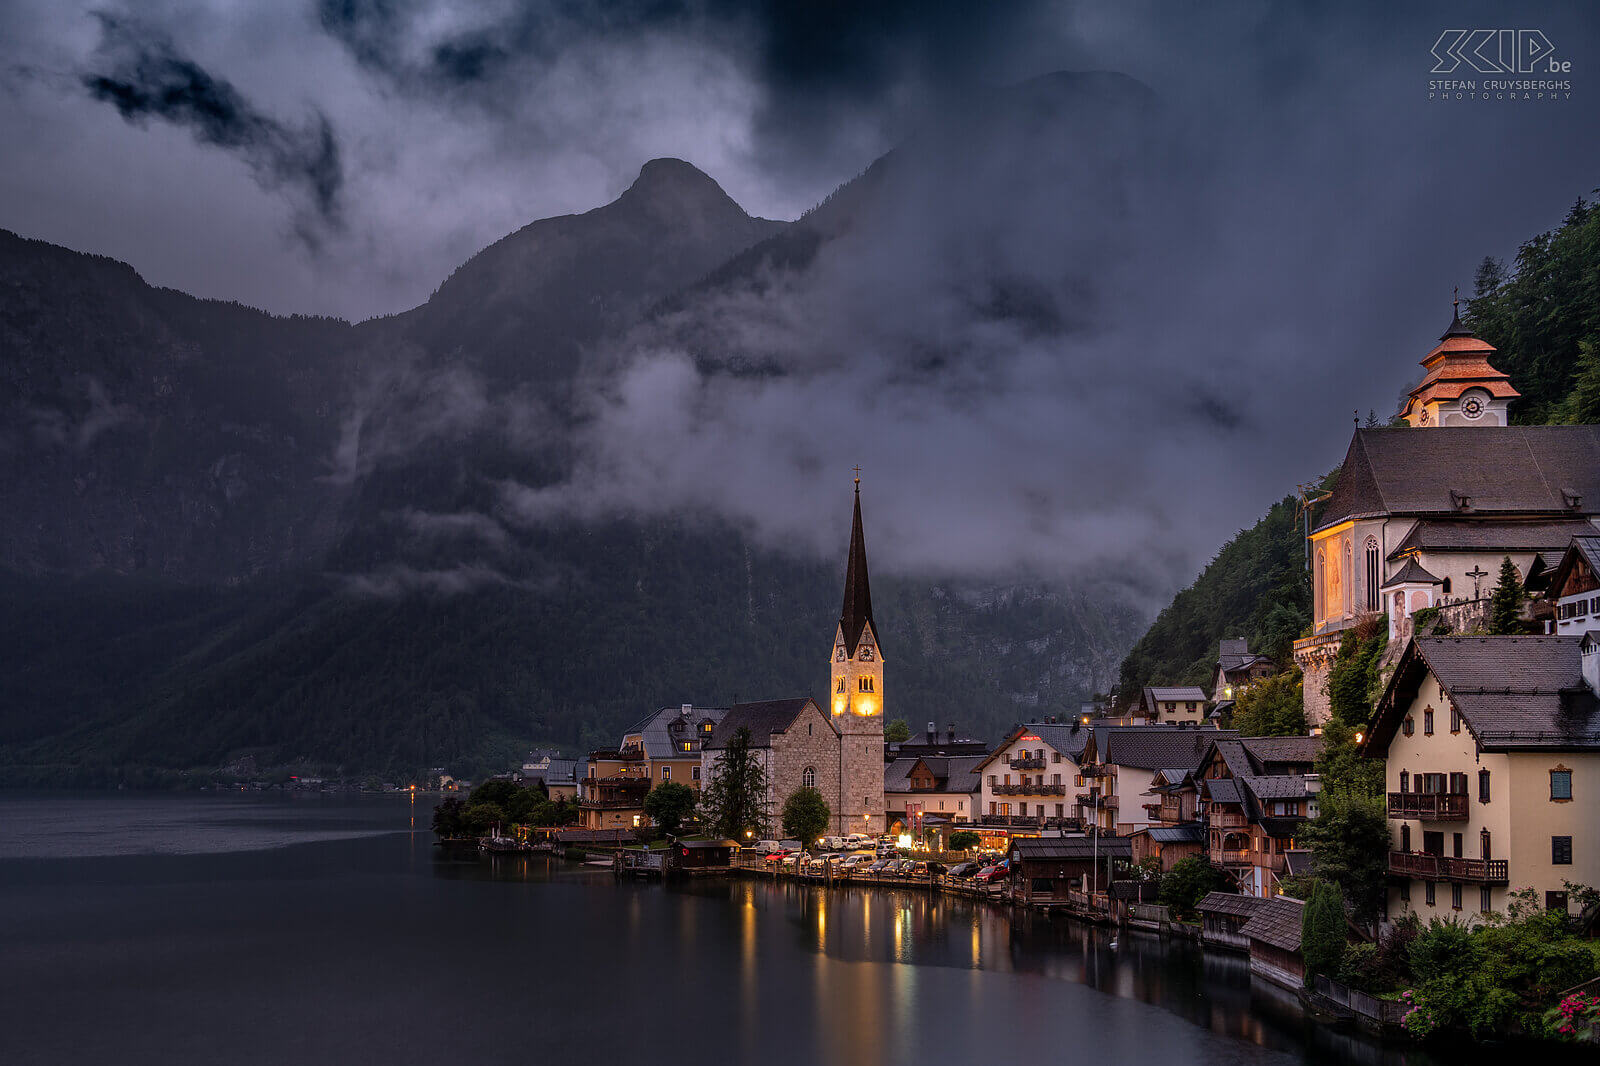 Hallstatt by night We stayed one night in the picturesque, famous and popular village of Hallstatt. This village is located between the Hallstättersee and the Dachstein Mountains Stefan Cruysberghs